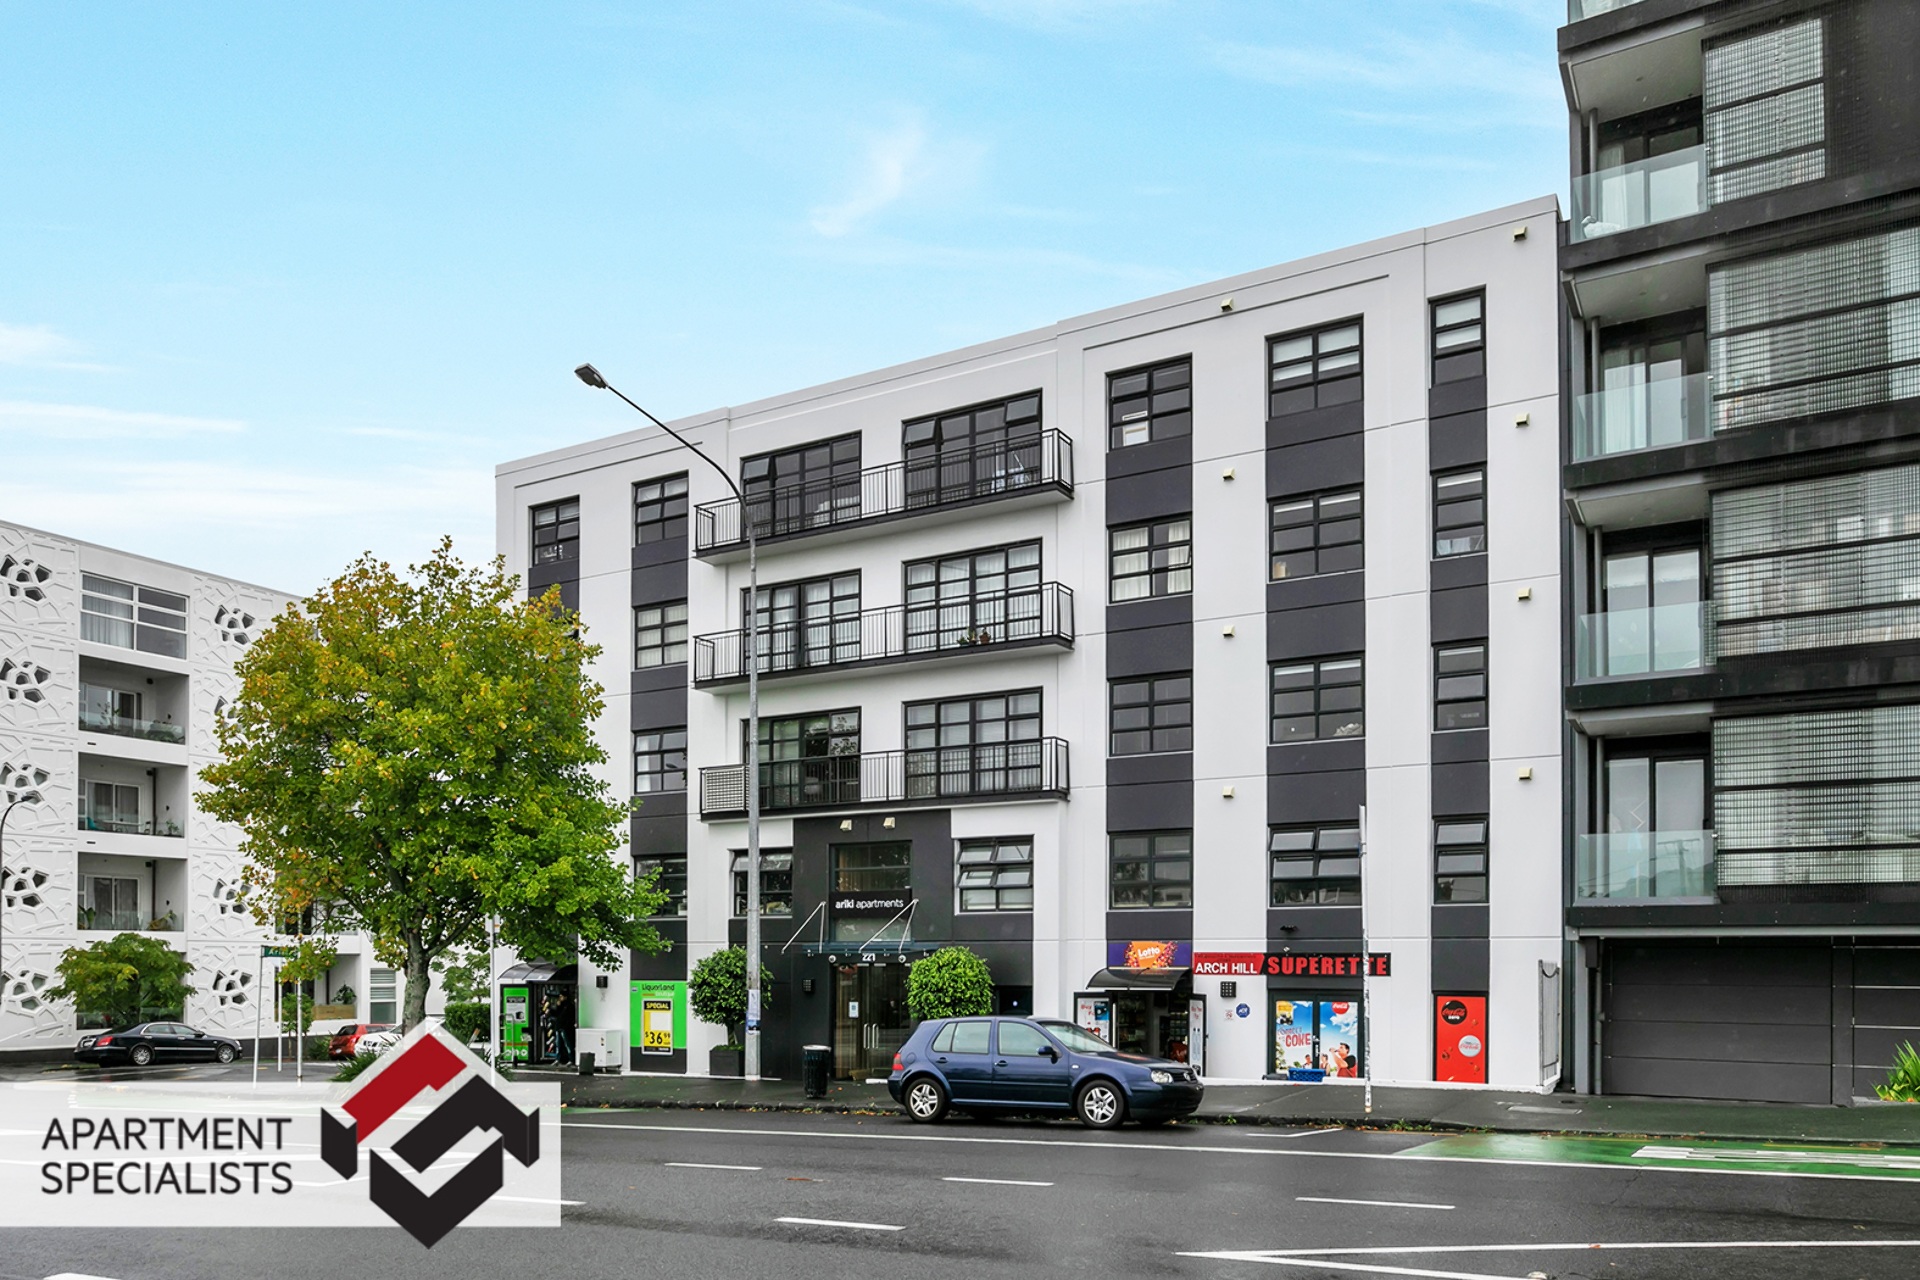 2 | 221 Great North Road, Grey Lynn | Apartment Specialists